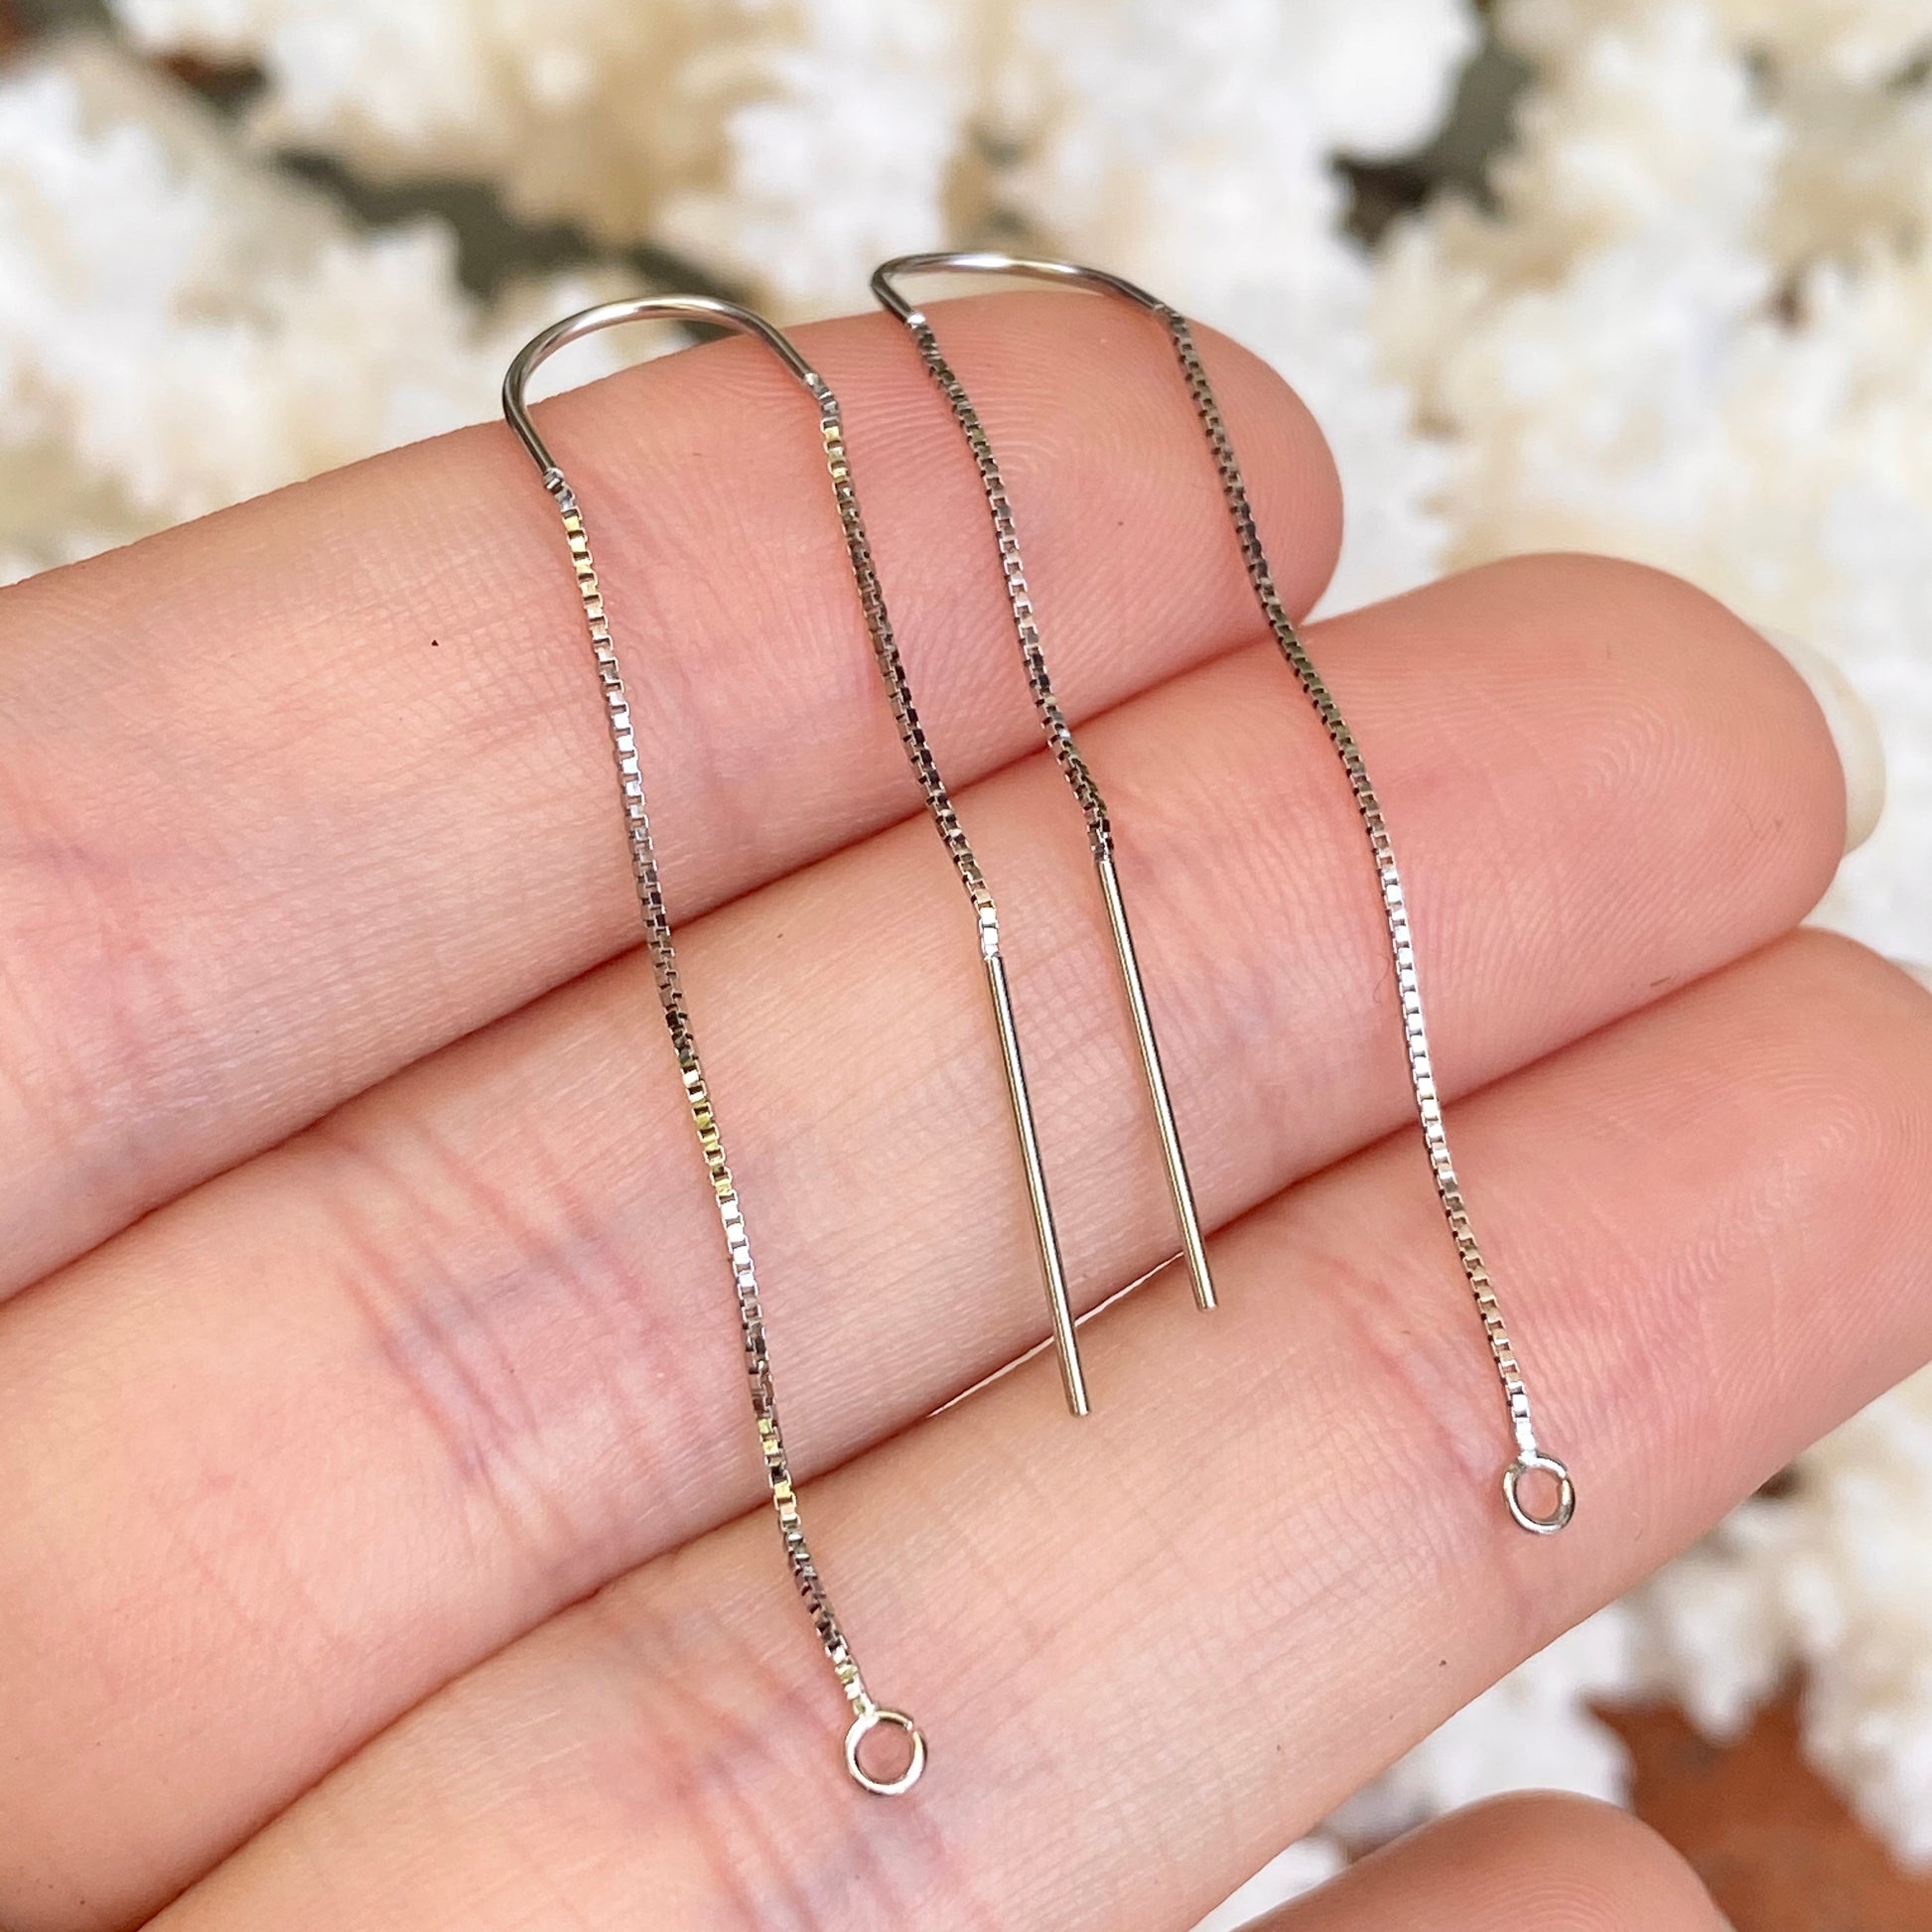 14KT White Gold Box Chain Threader Earrings with Open Ring, 14KT White Gold Box Chain Threader Earrings with Open Ring - Legacy Saint Jewelry